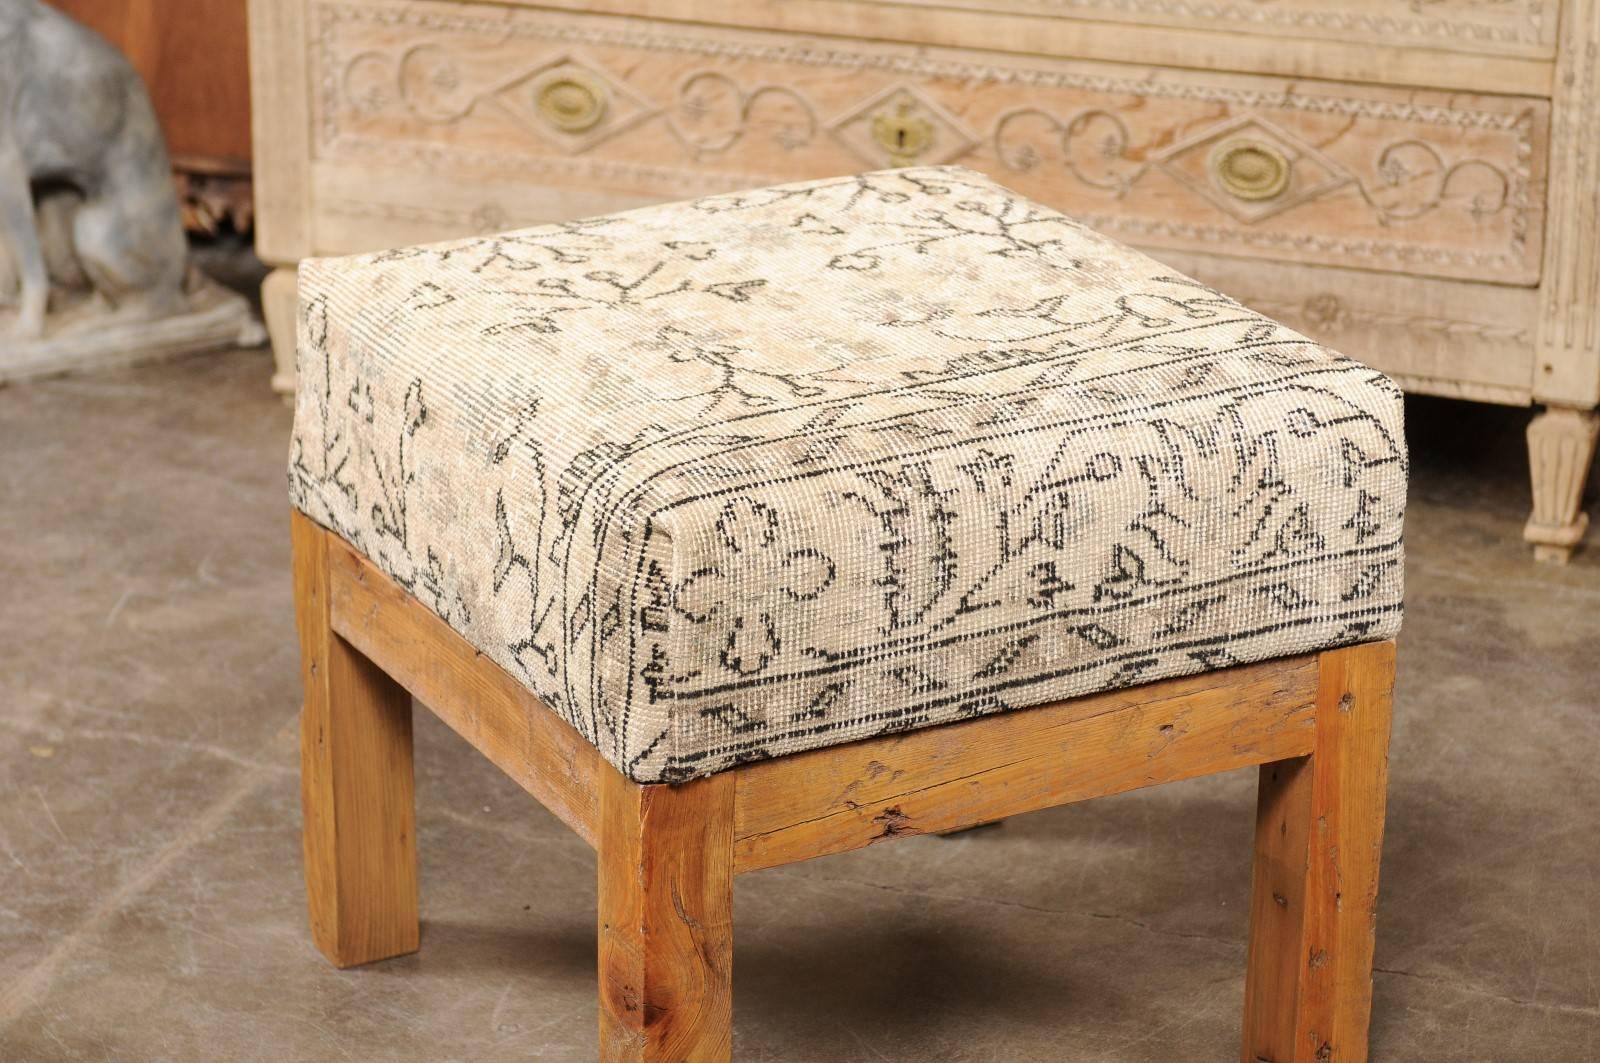 Contemporary Light Colored Turkish Vintage Wool Upholstered Stool over Old Wooden Base